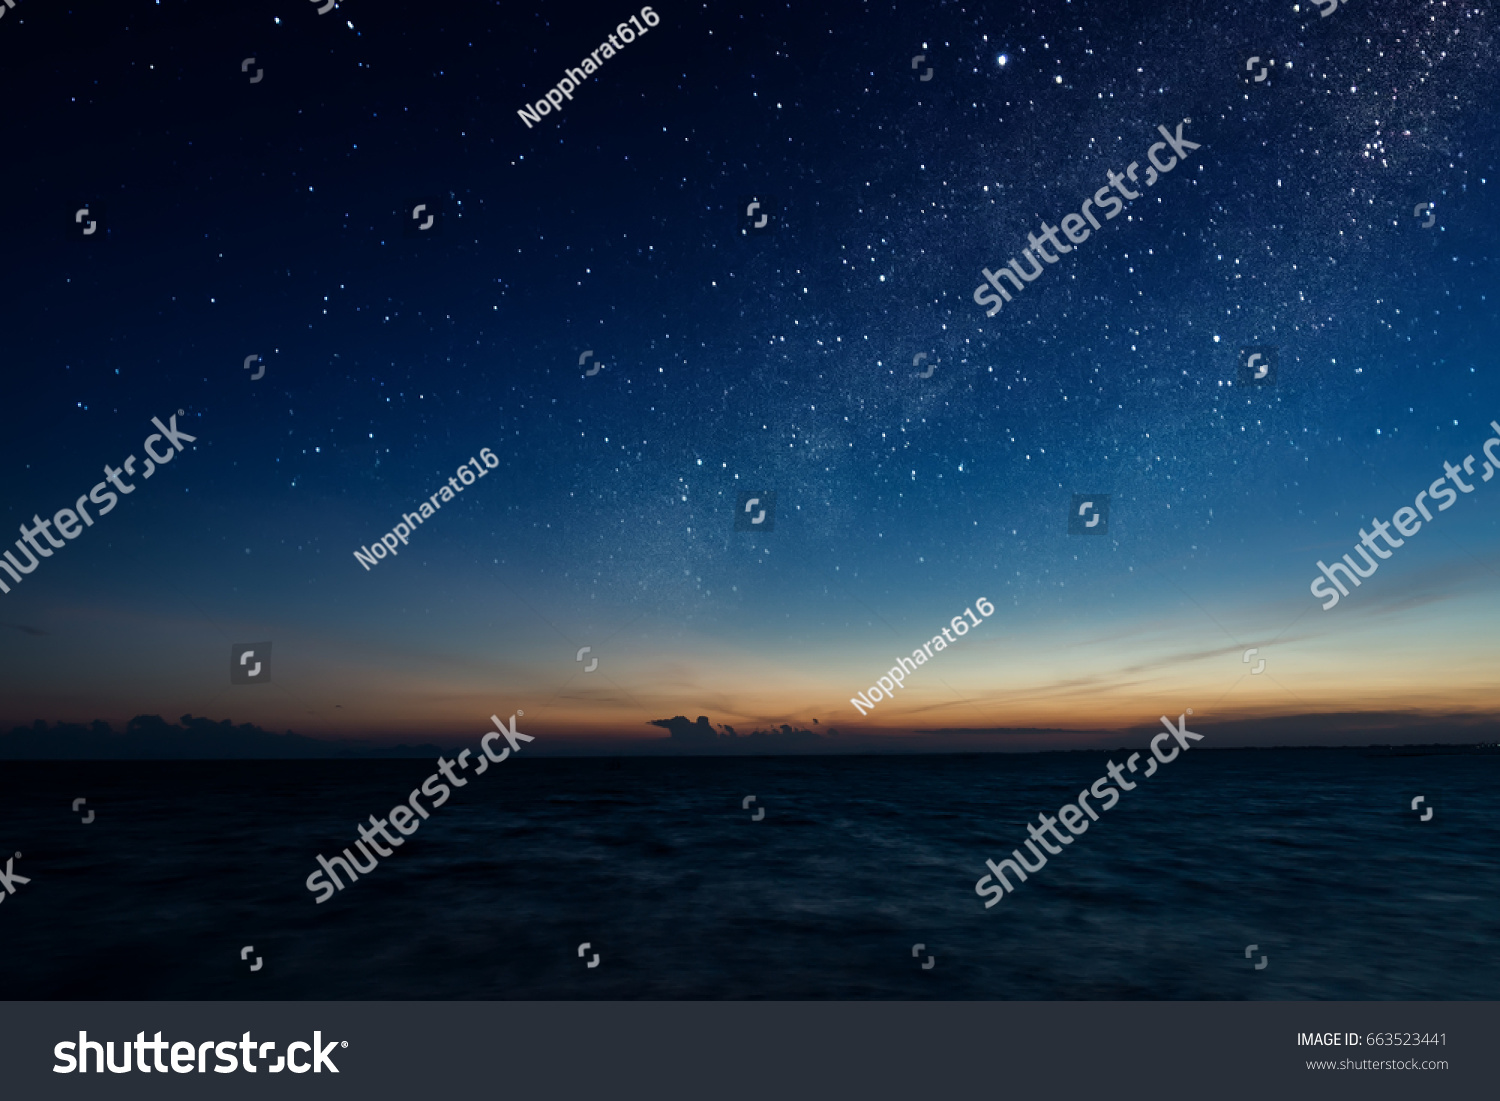 The sky with star at the lake in the twilight after sunset. #663523441